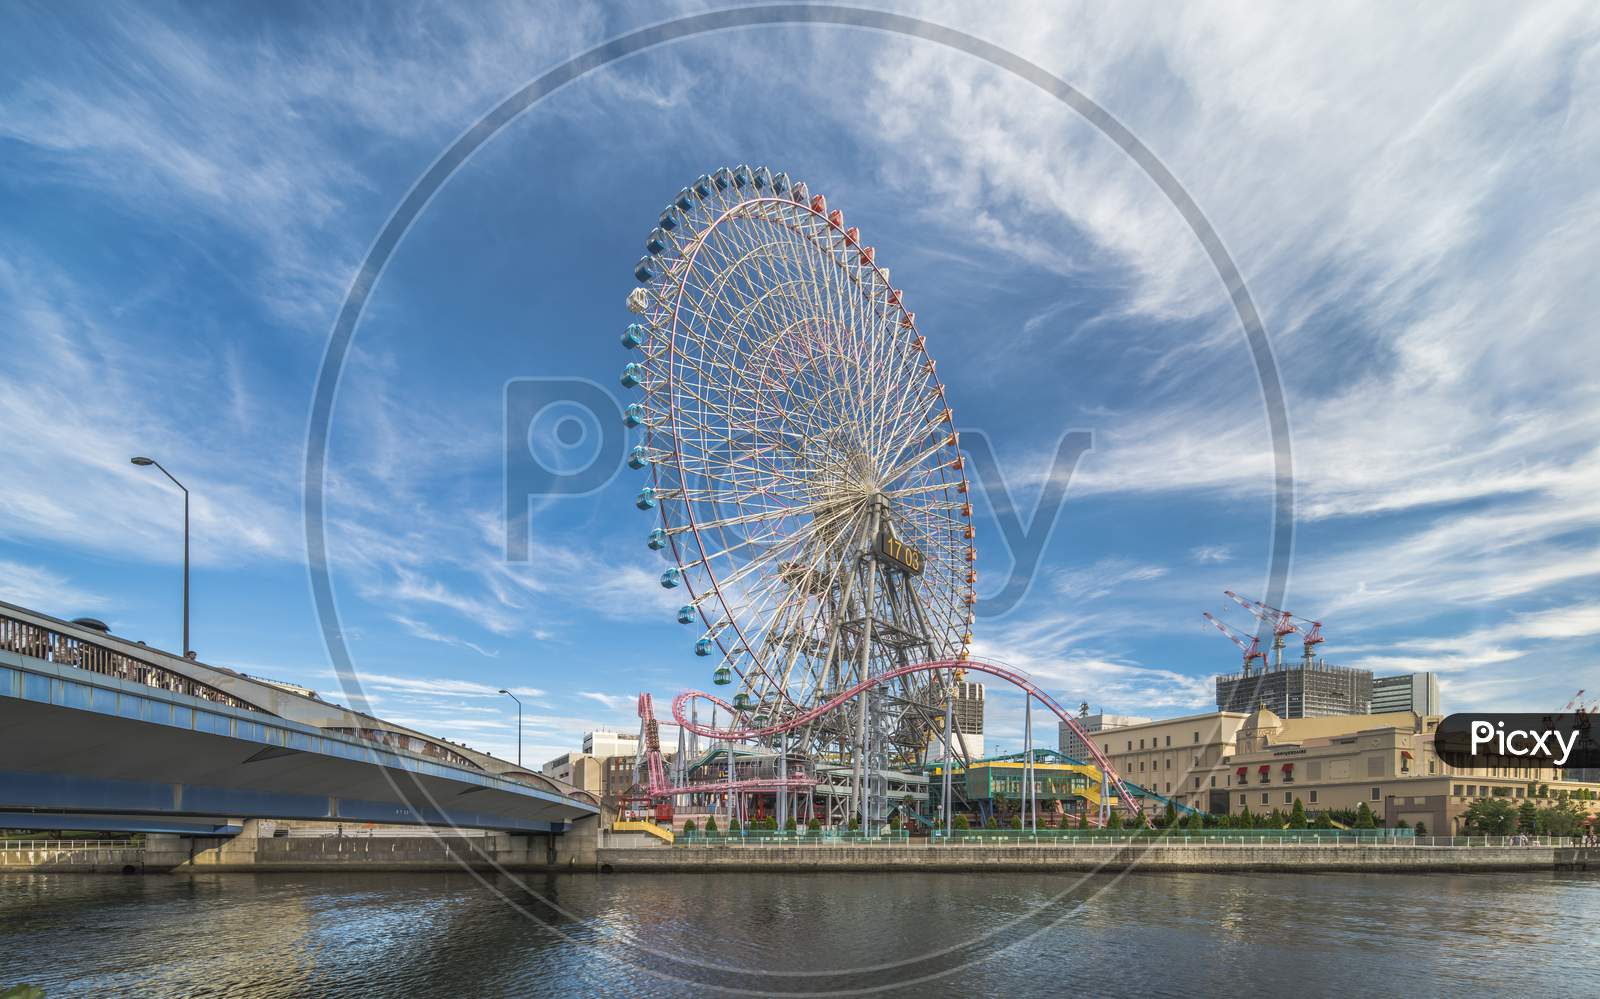 Cosmo Clock 21 Big Wheel At Cosmo World Theme Park, Overlooking The Diving Coaster Vanish In The Minato Mirai District Of Yokohama With The Kokusai Bridge On The Left And The Anniversaire Cafe On The Right.